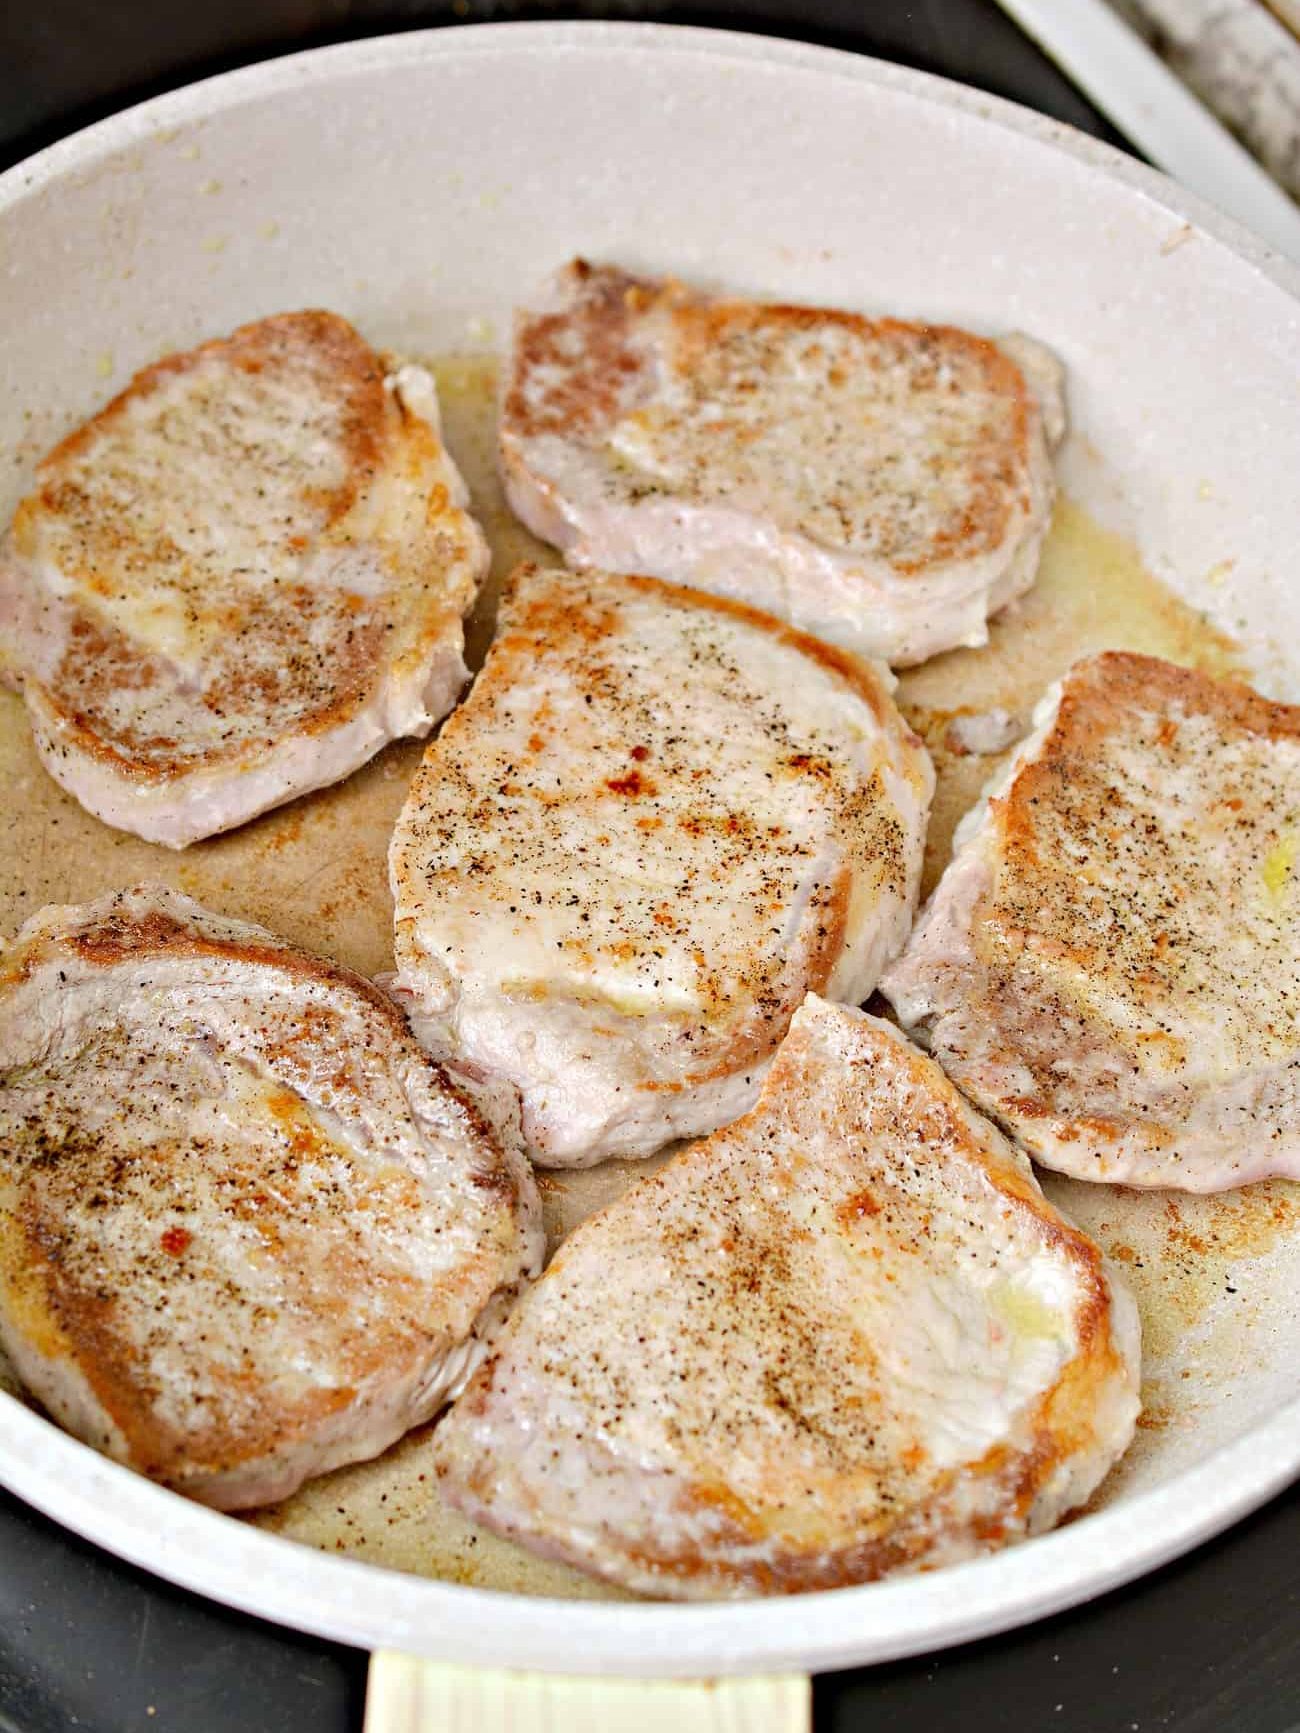 Add the pork chops to the heated skillet and brown on both sides. Remove, and set aside.